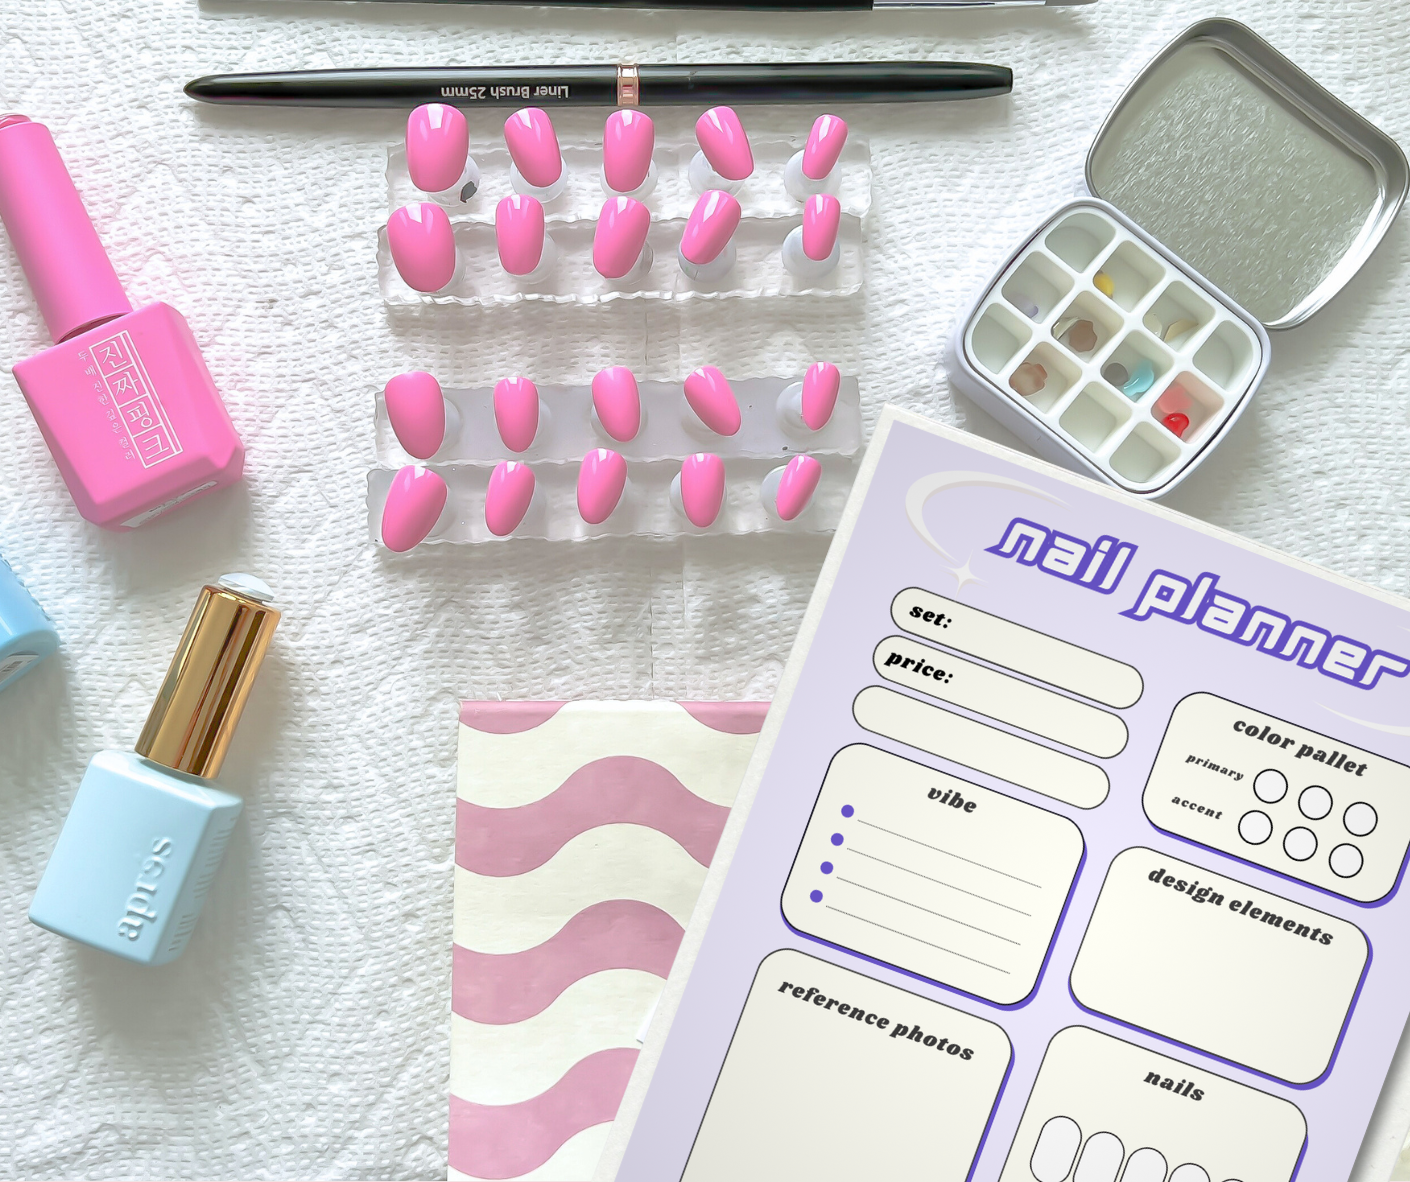 Nail Planner